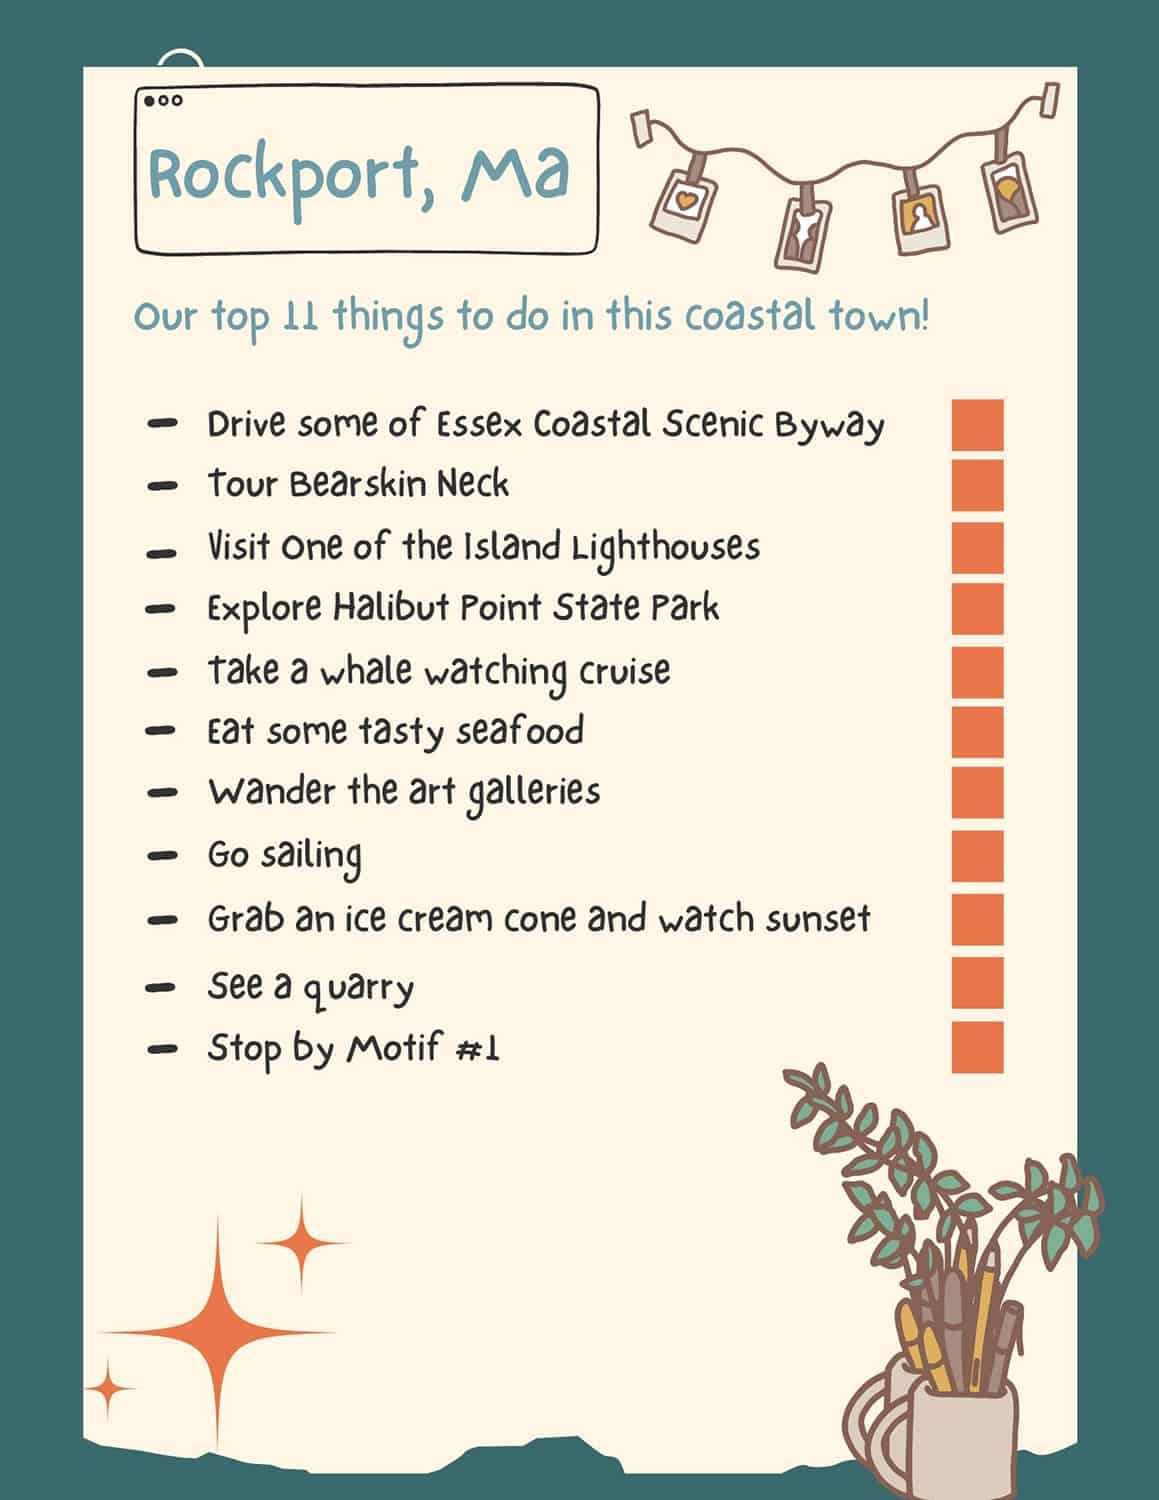 a chart showing the top 11 things to do in Rockport, according to Traveling In Focus, in case you have limited time.  our complete list is 30 things